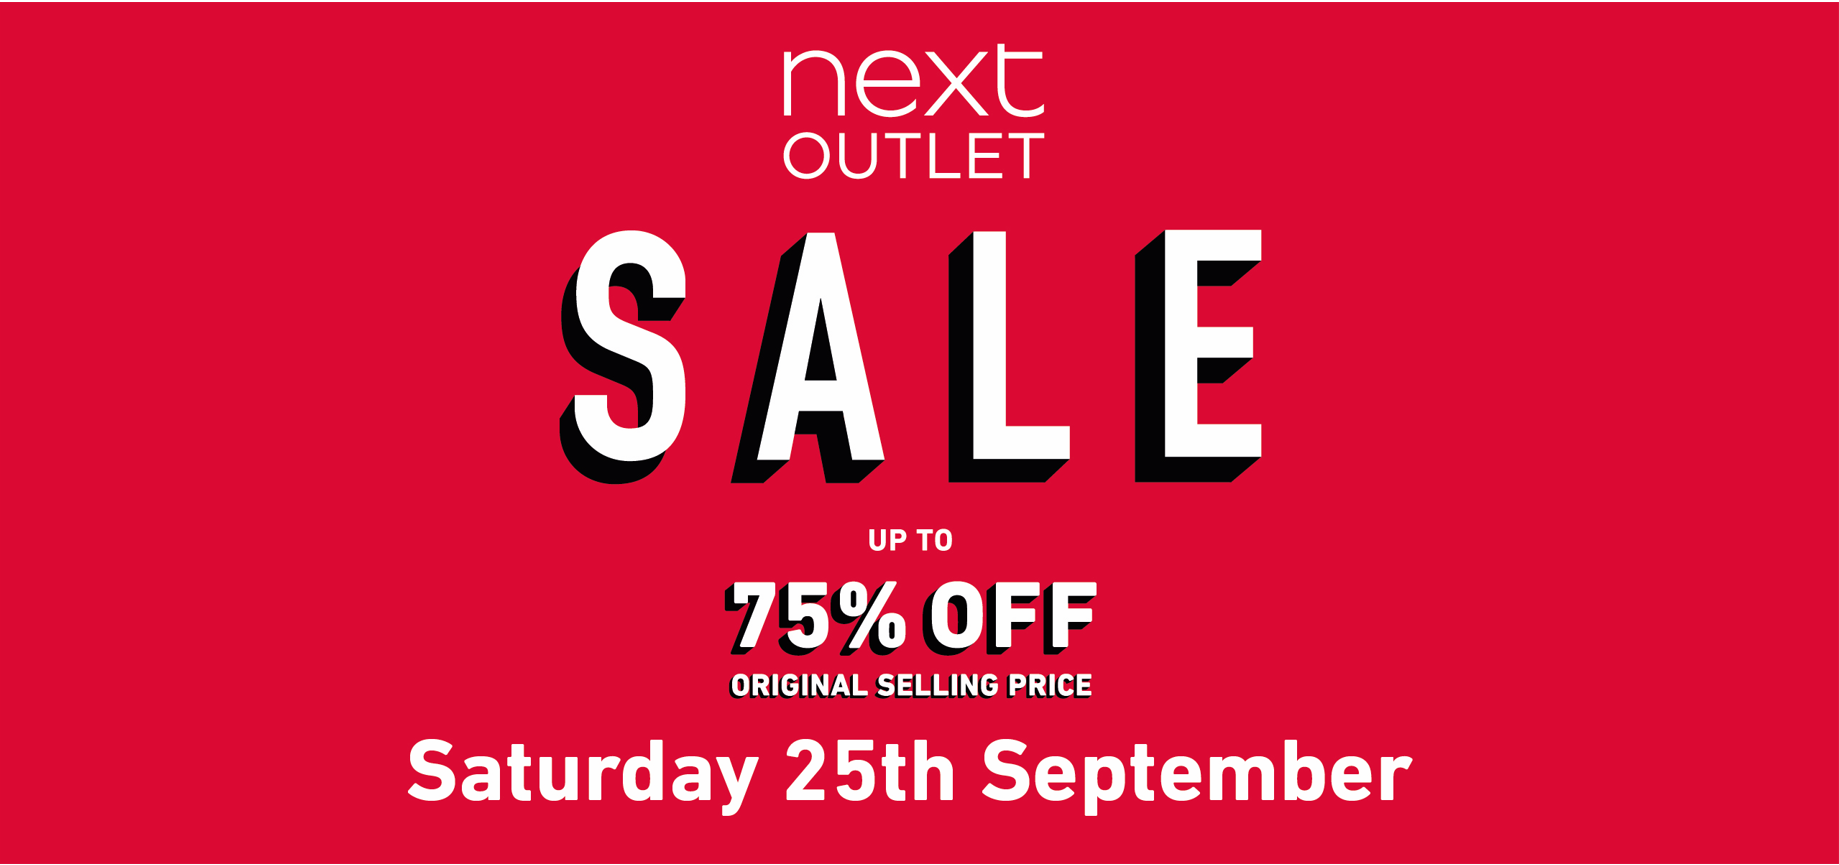 Next Outlet Sale Affinity Staffordshire Whats On